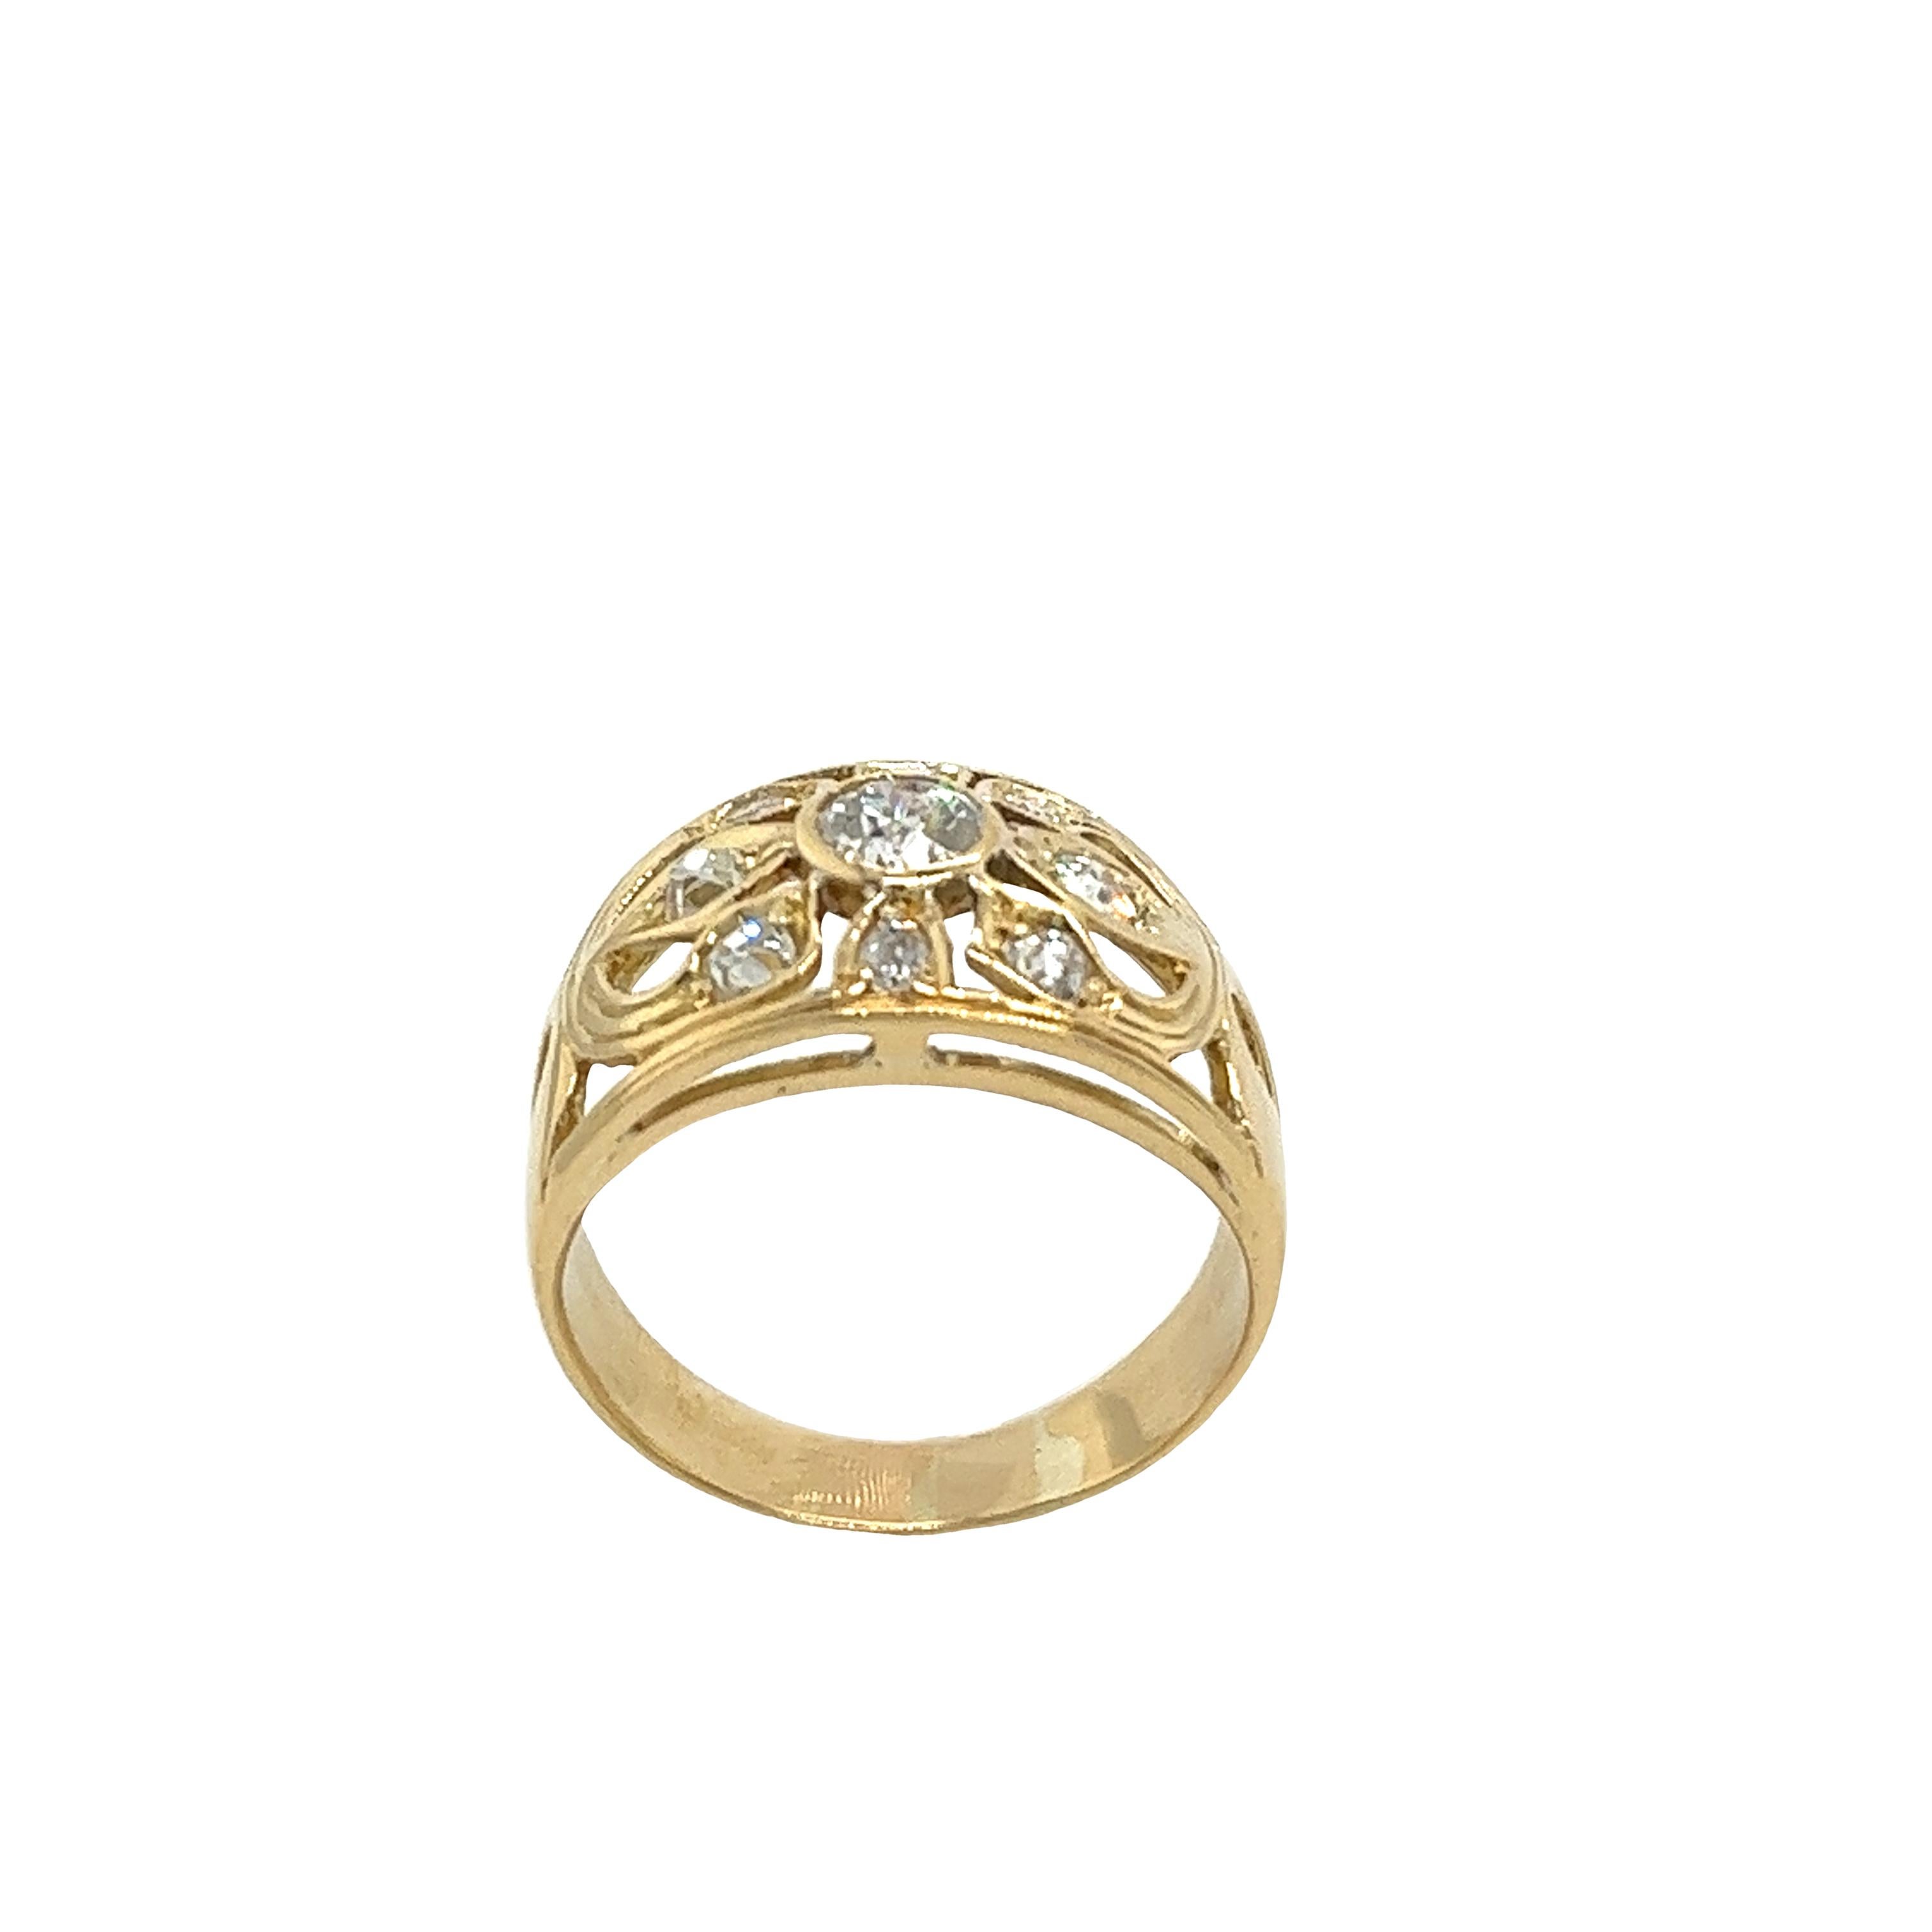 Round Cut 14ct YellGold Diamond Dress Ring Set With 0.60ct of Natural Diamonds For Sale